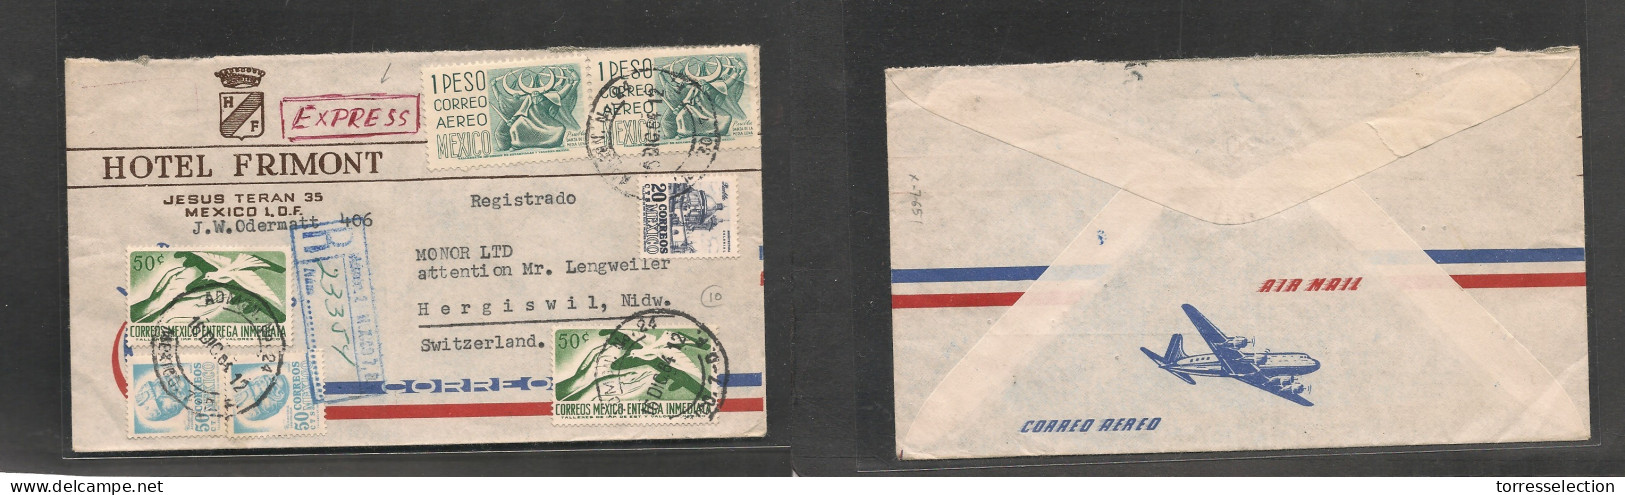 MEXICO. Mexico Cover - 1964 DF To Switz Hergiswil Registr Express Mult Fkd Env Hotel Frimont Mixed Issues, Fine XSALE. - Mexiko